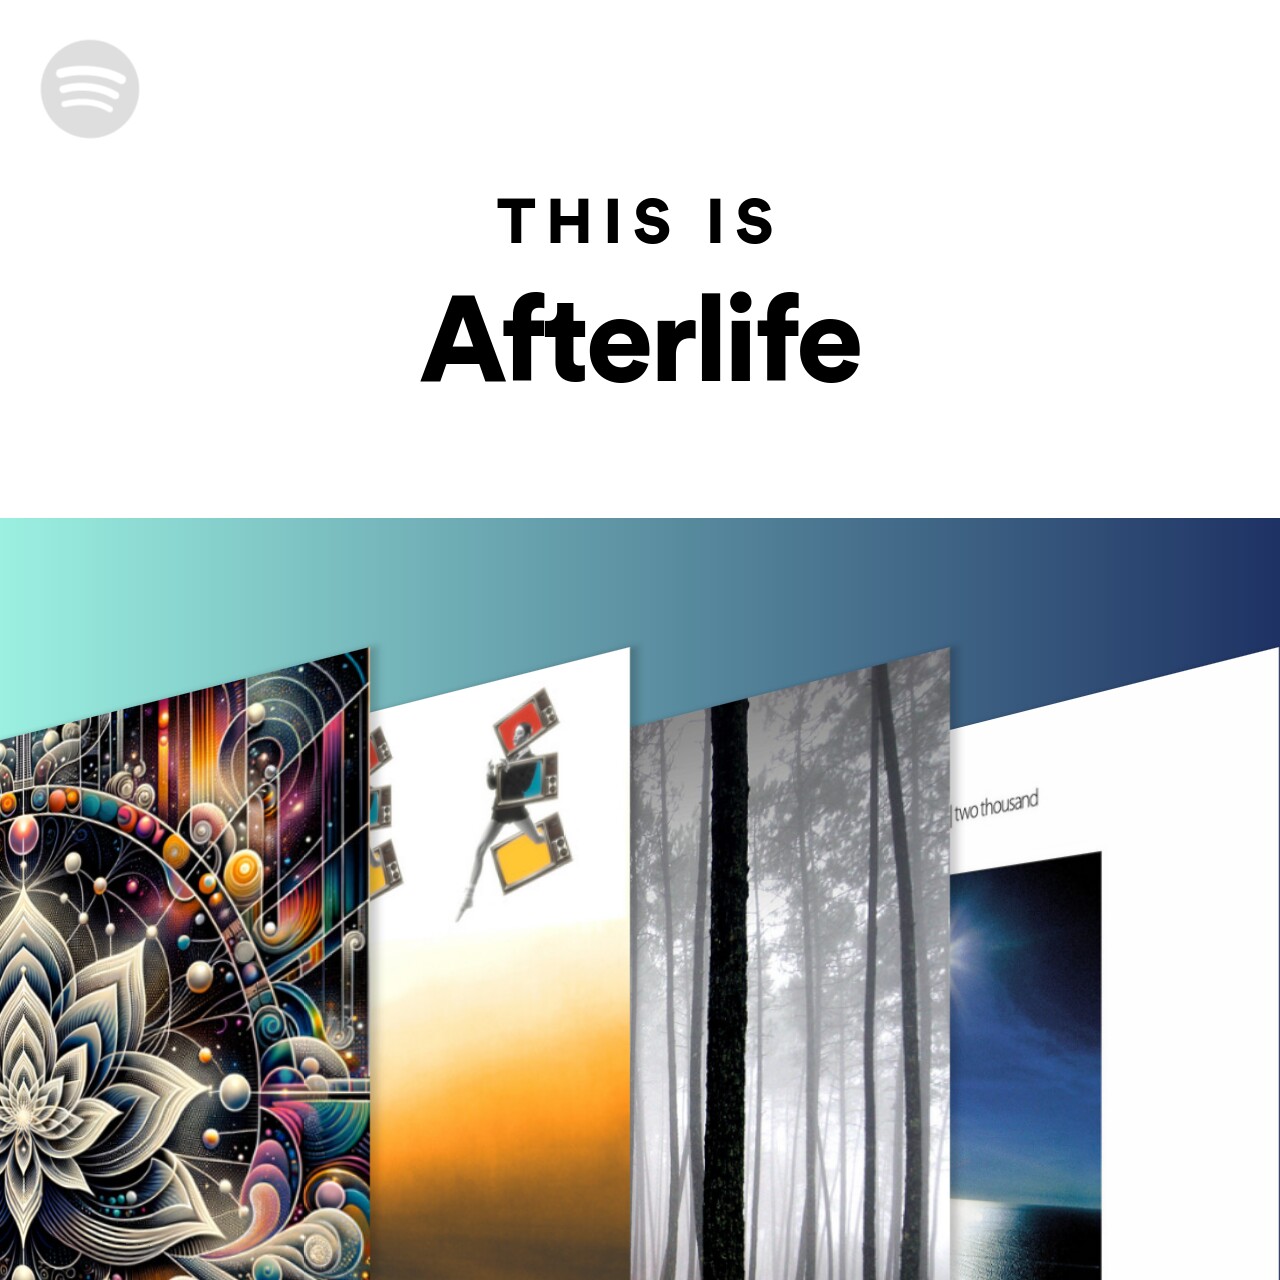 This Is Afterlife